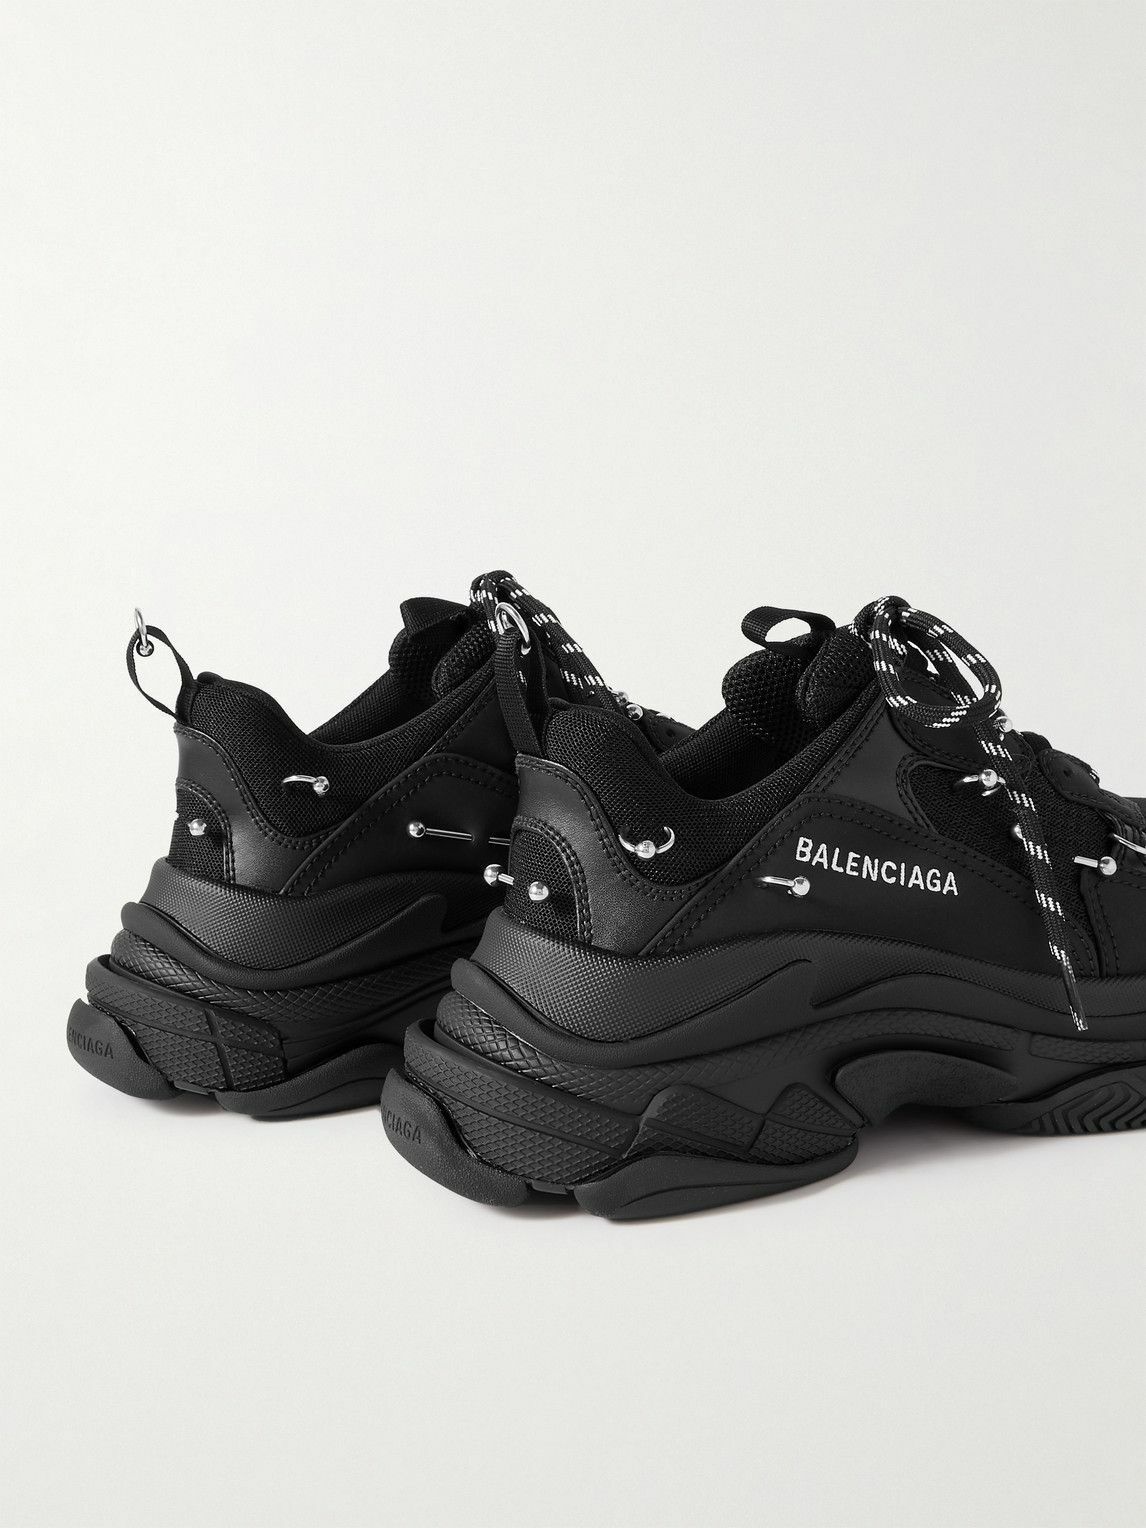 Balenciaga - Triple S Piercing Mesh, Rubber and Leather Sneakers